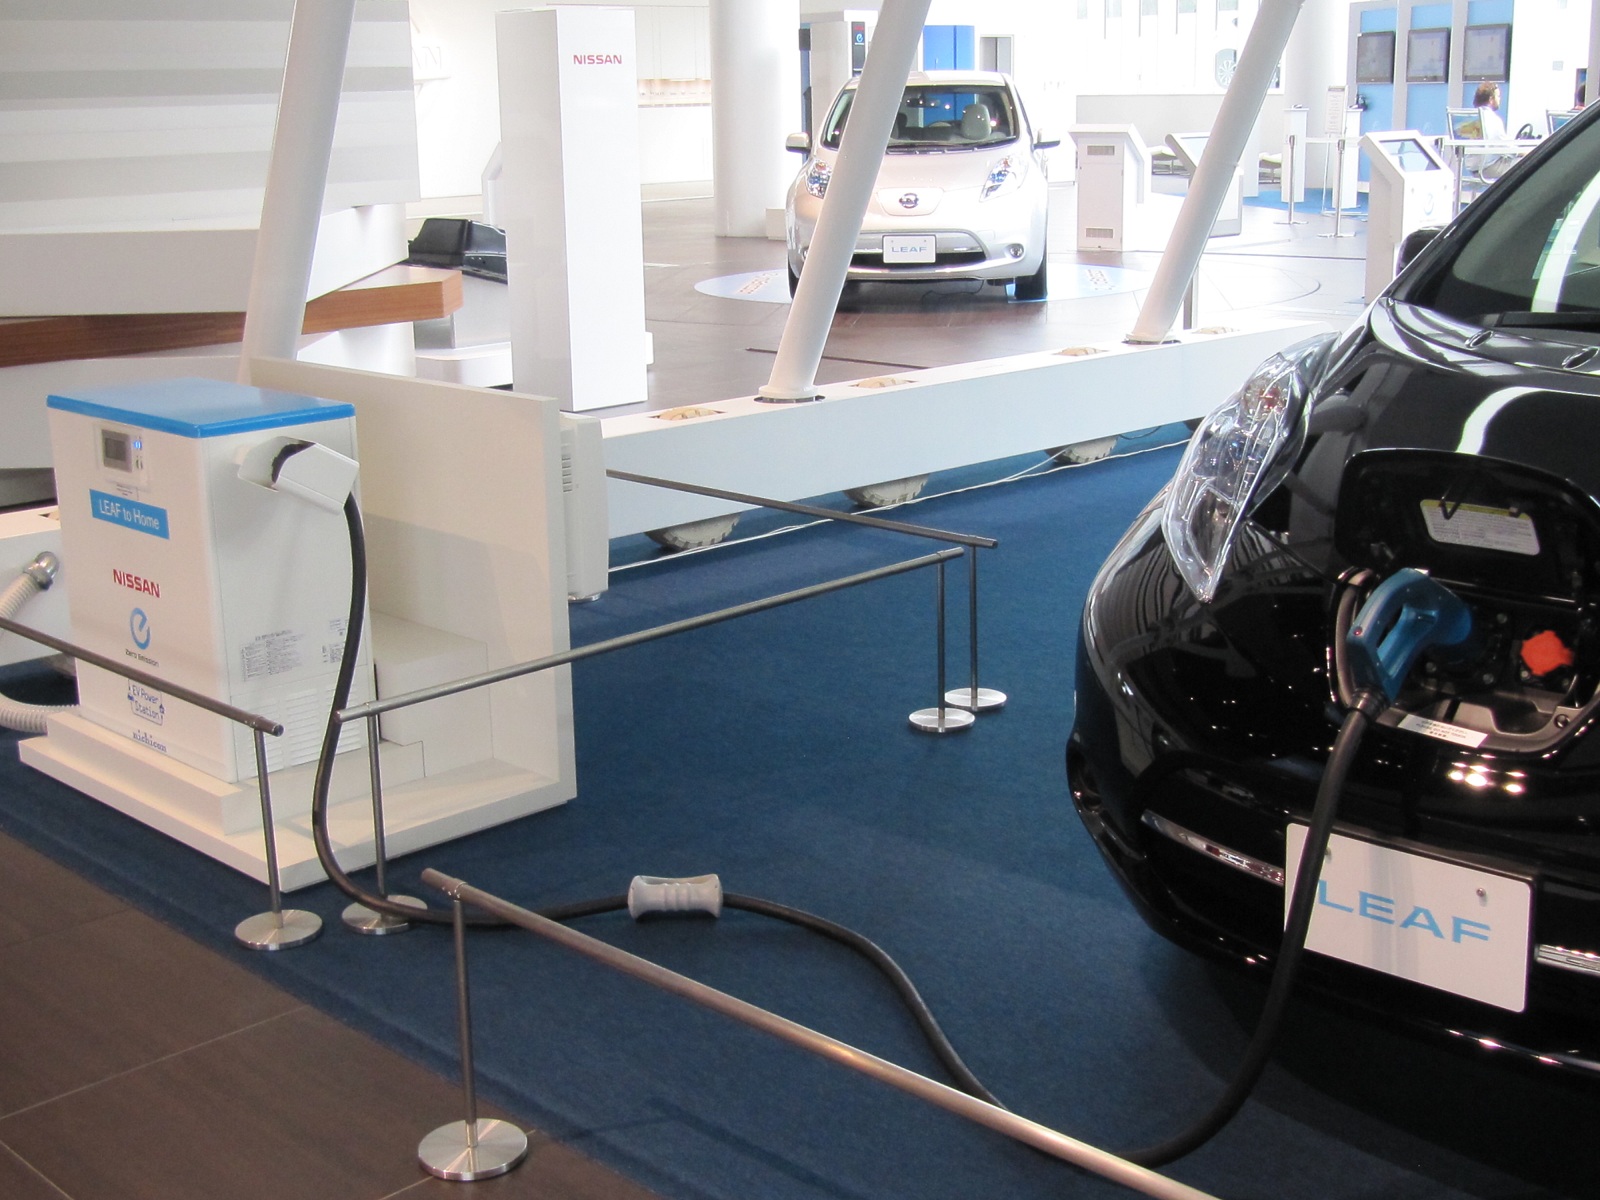 Nissan Leaf as home energy device: Wallbox will soon enable it in the U.S.